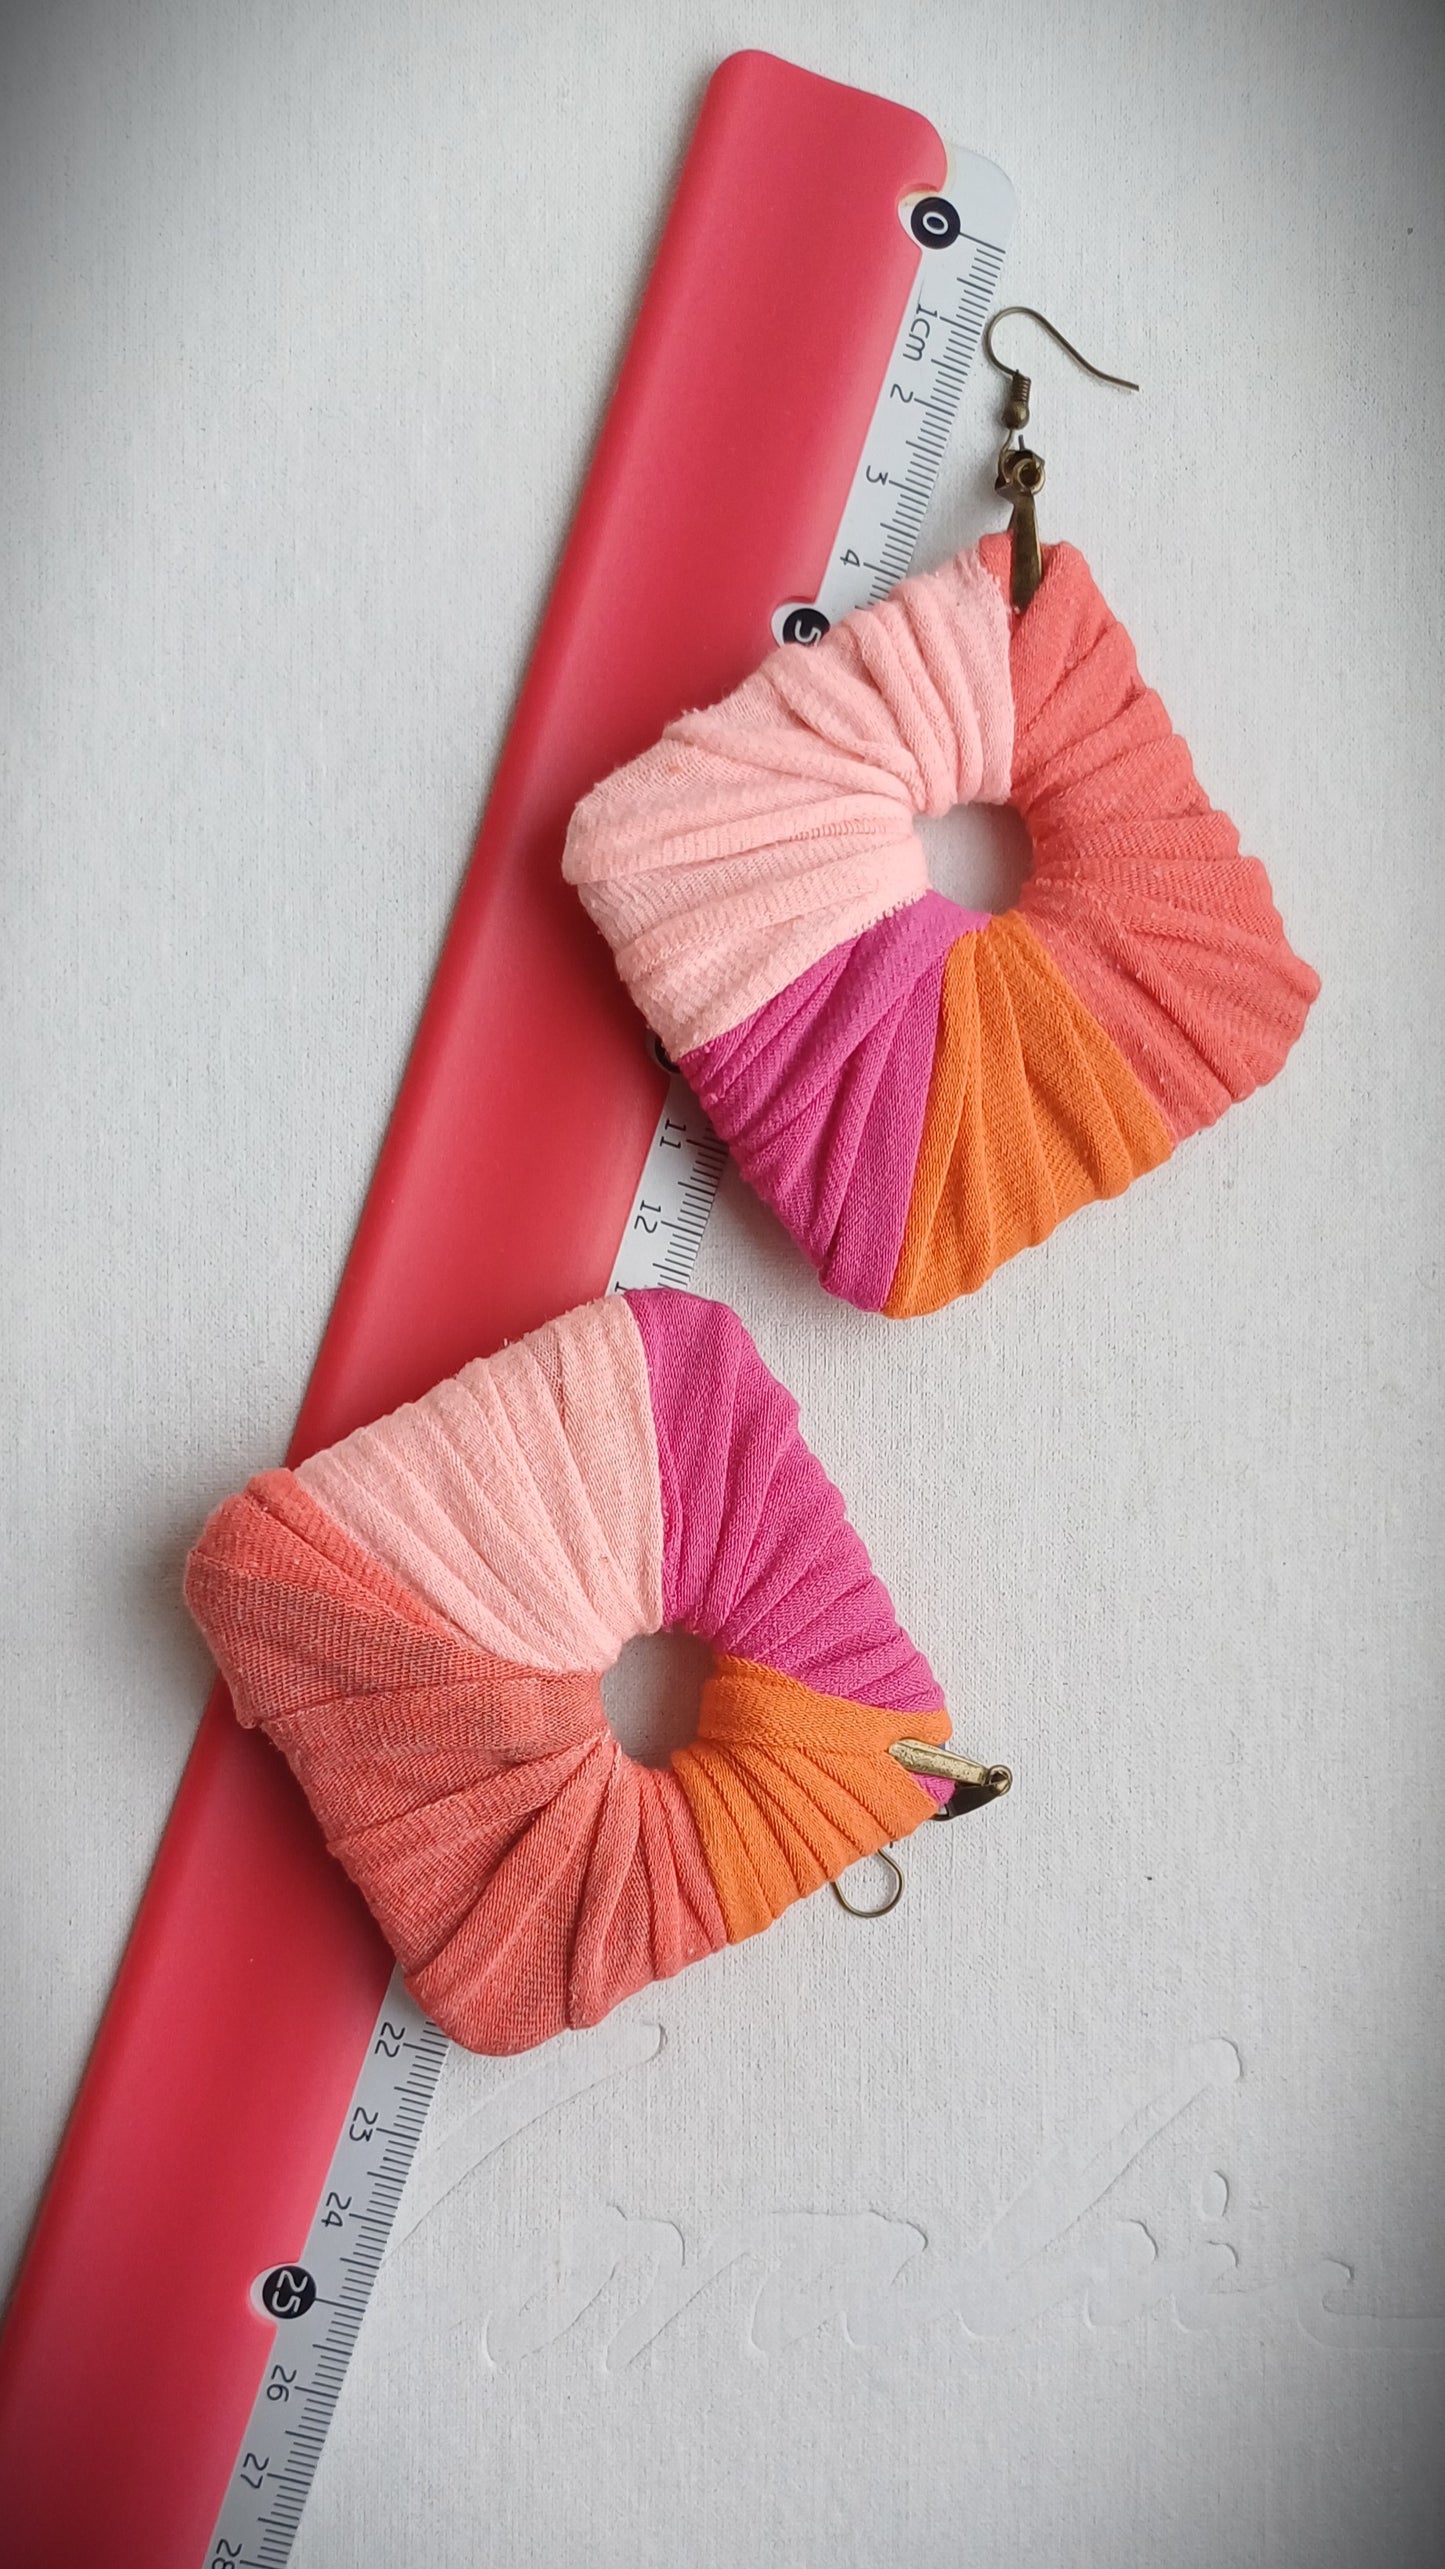 Peach Fuzz, Orange, and Pink Ecofriendly Earrings ReviveWeave Jumbo Squares Upcycled Jewelry